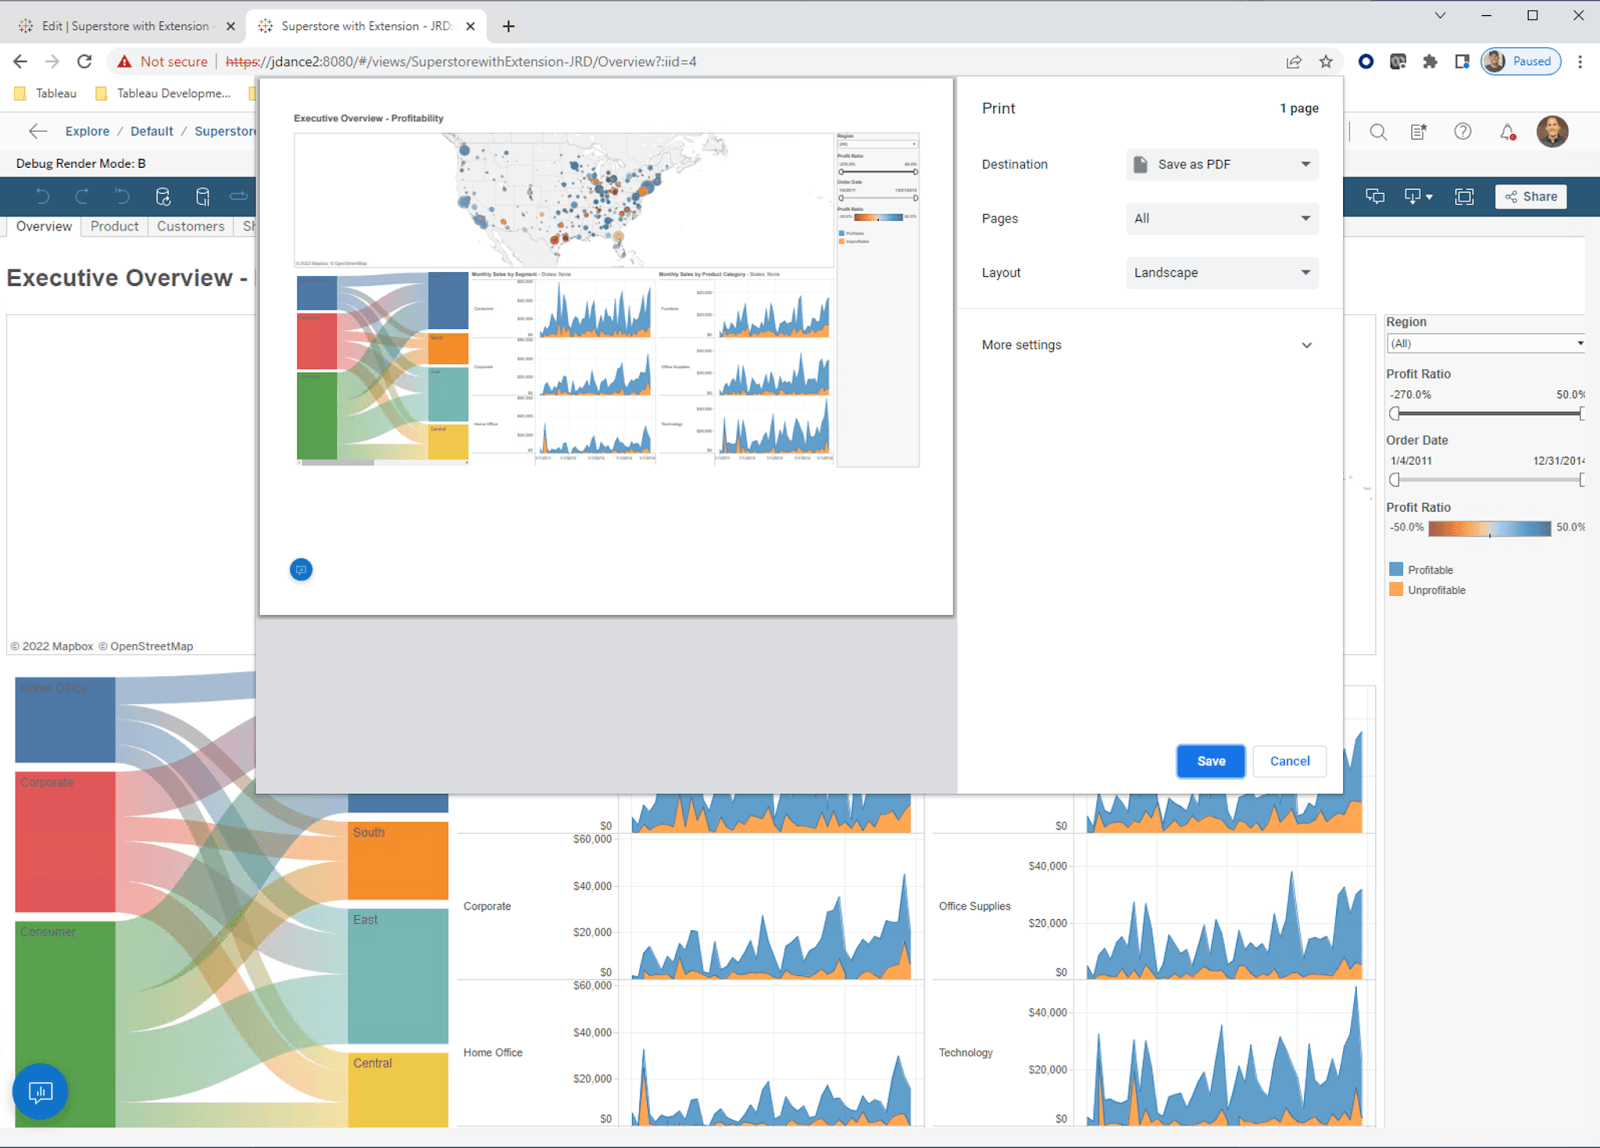 Tableau interface in a web browser, showing a landscape print preview of a dashboard through the browser’s native printing capabilities.